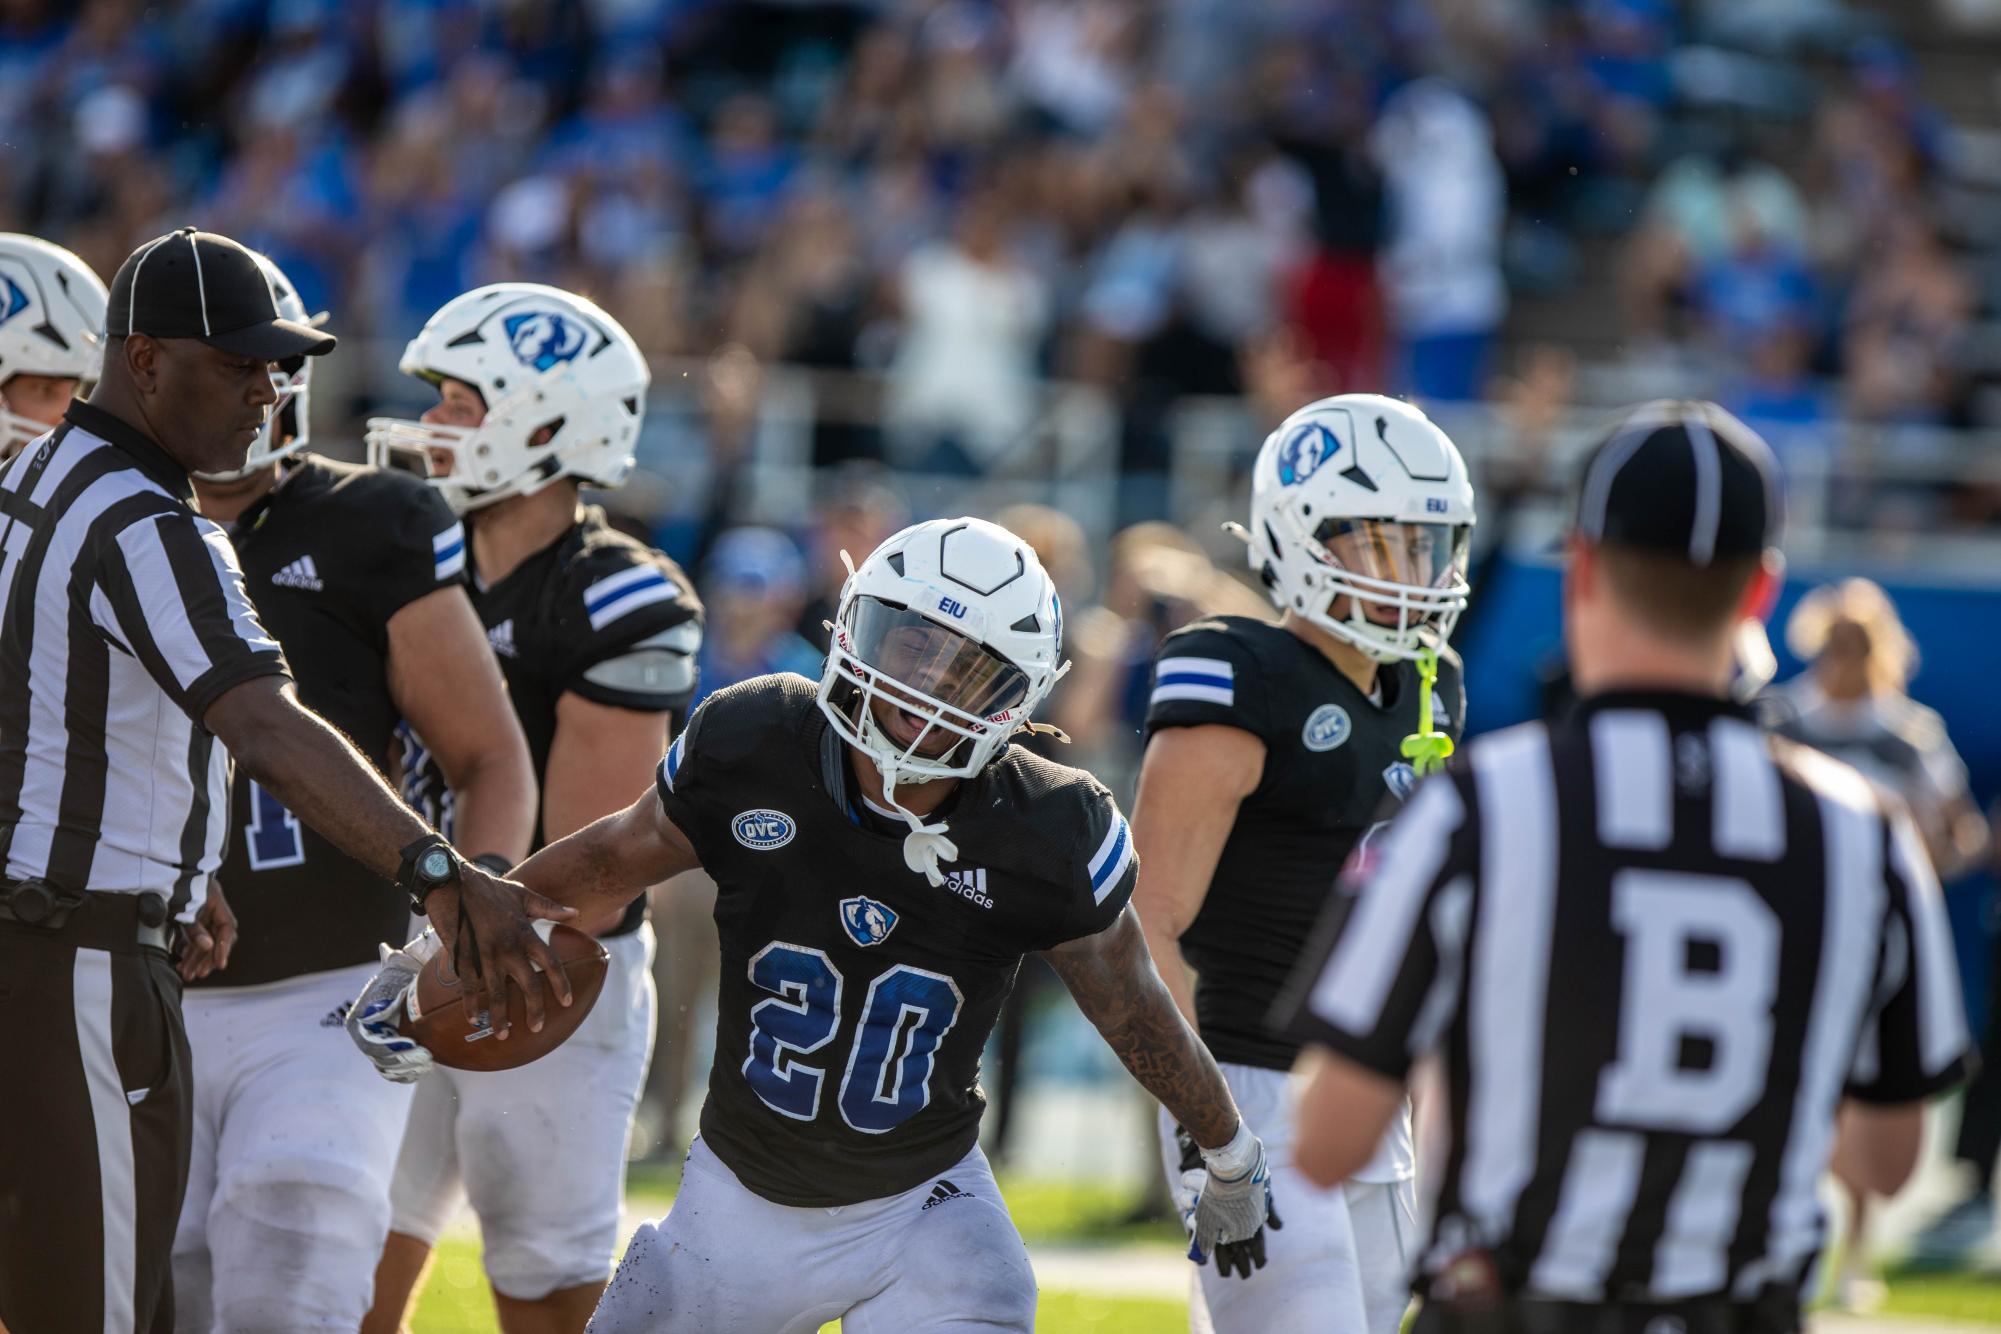 Freshman running back MJ Flowers (20) celebrates as after scoring a touchdown at O‘Brien Field Saturday afternoon.
MJ Flowers rushed for 272 yards on 37 carries. The EIU panthers beat the Mcneese St cowboys 31-28.